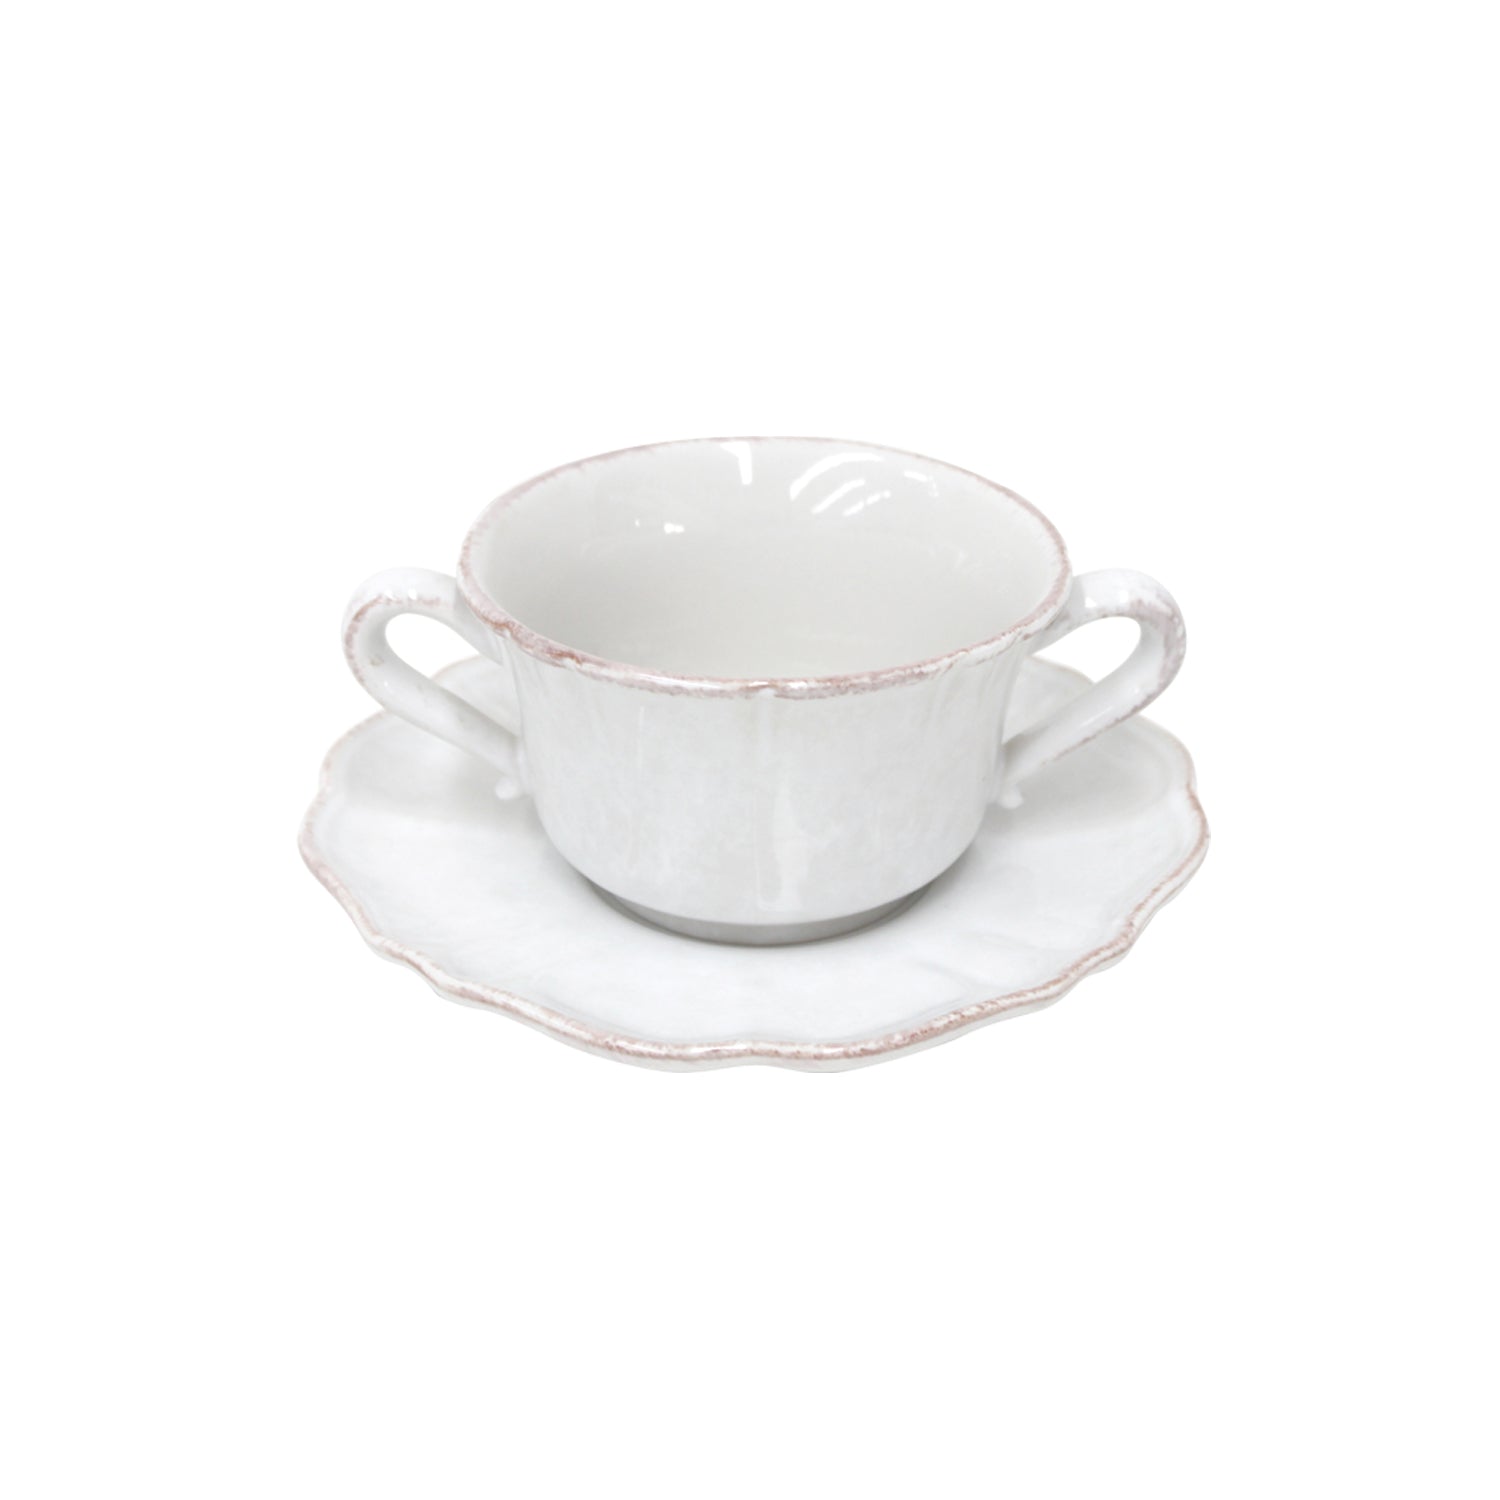 Impressions Consomme Cup and Saucer 13oz. White